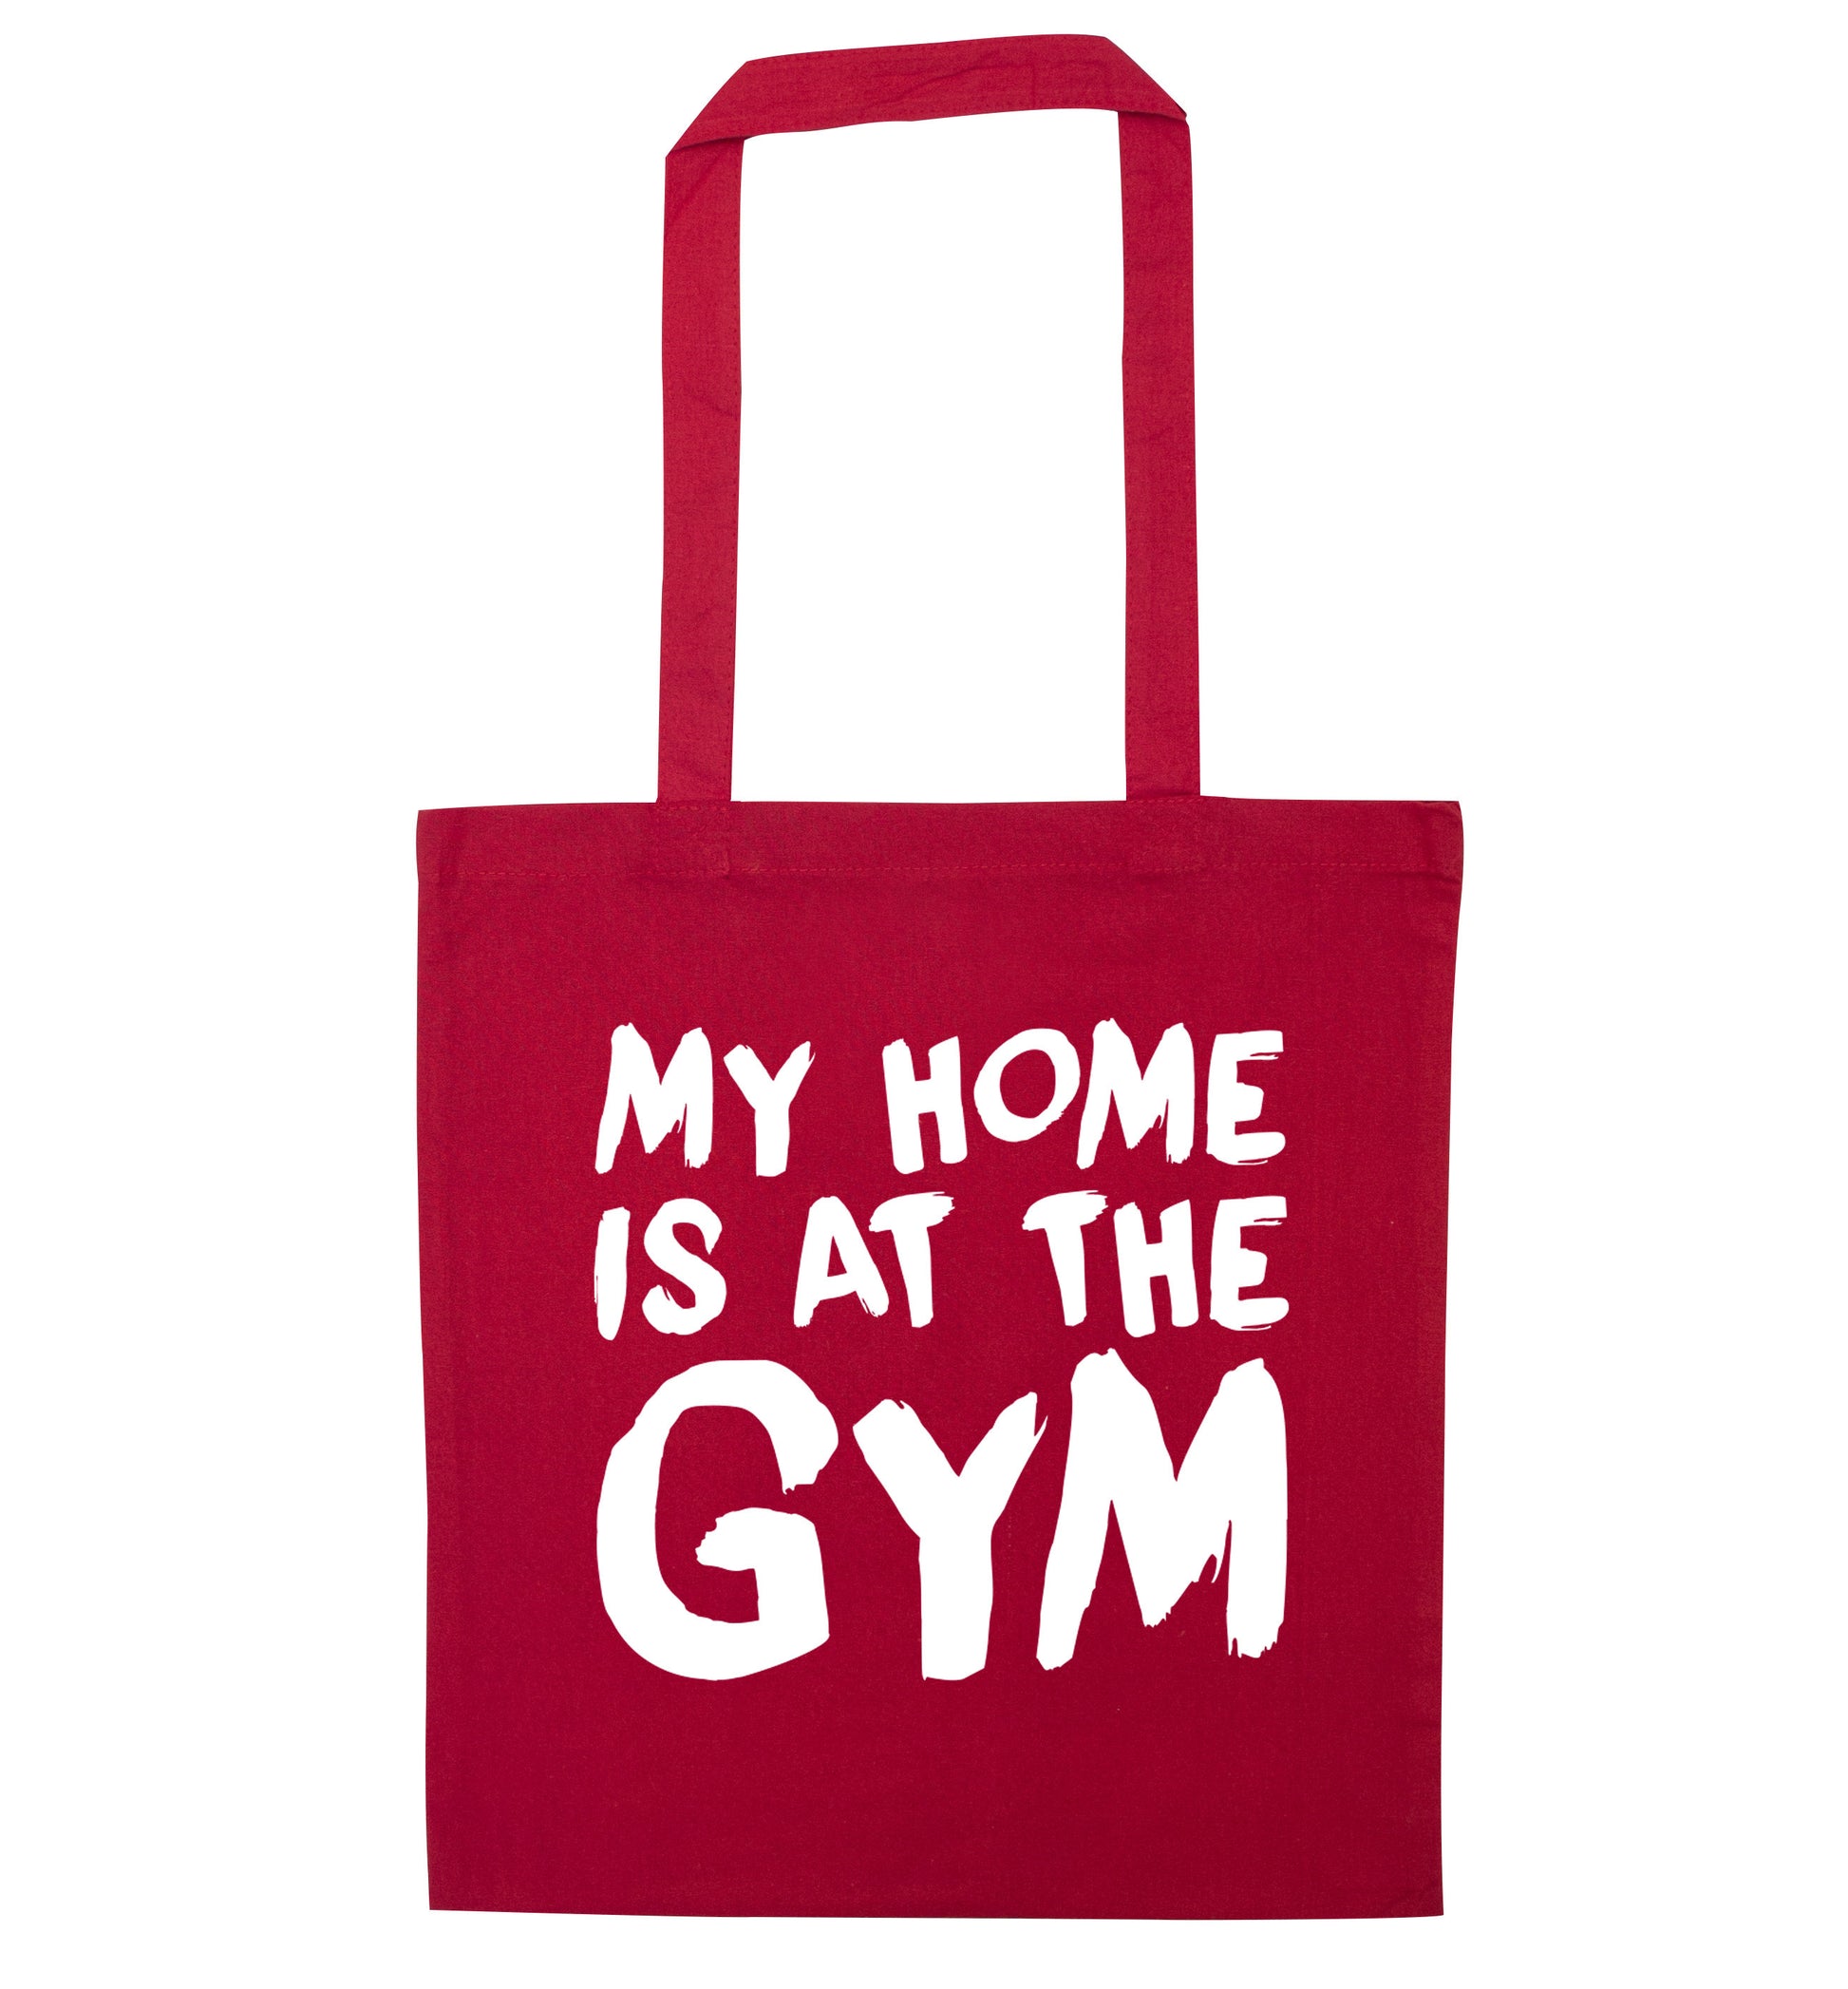 My home is at the gym red tote bag